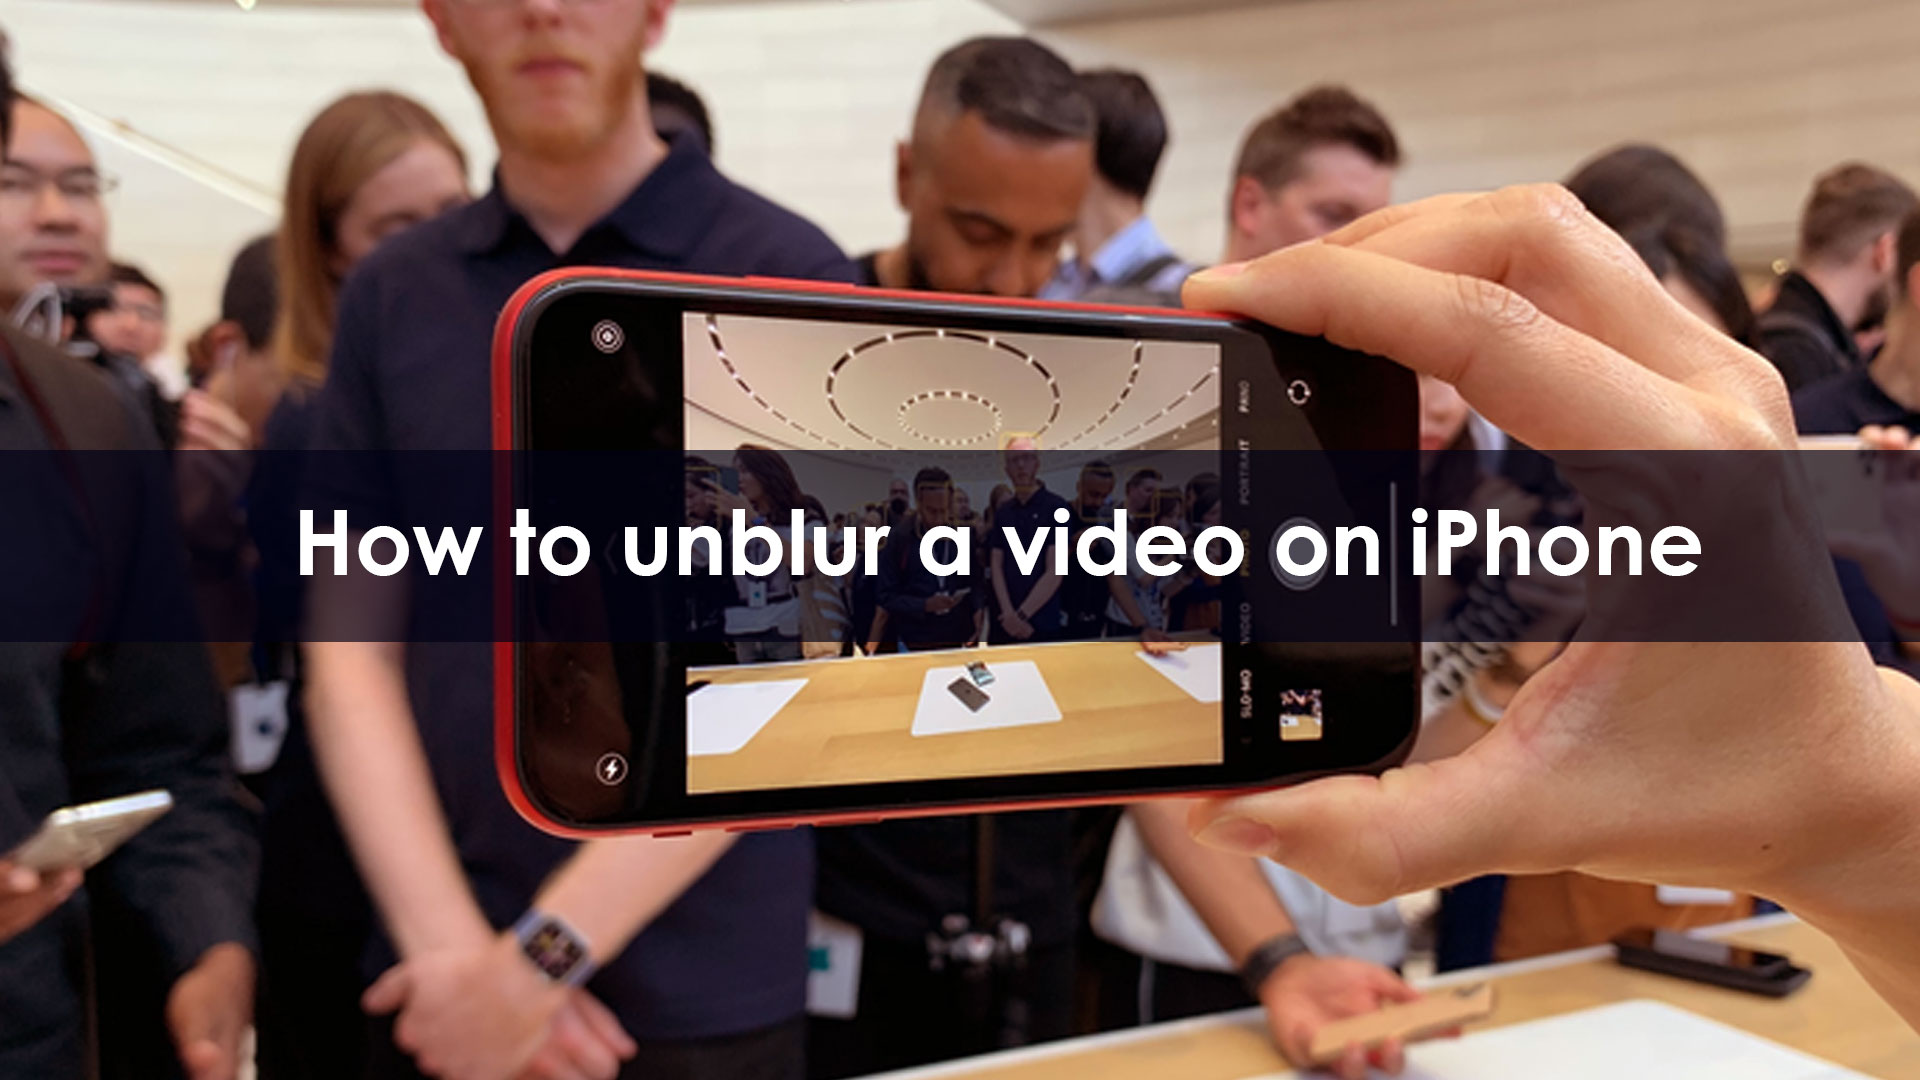 How to unblur a video on iPhone